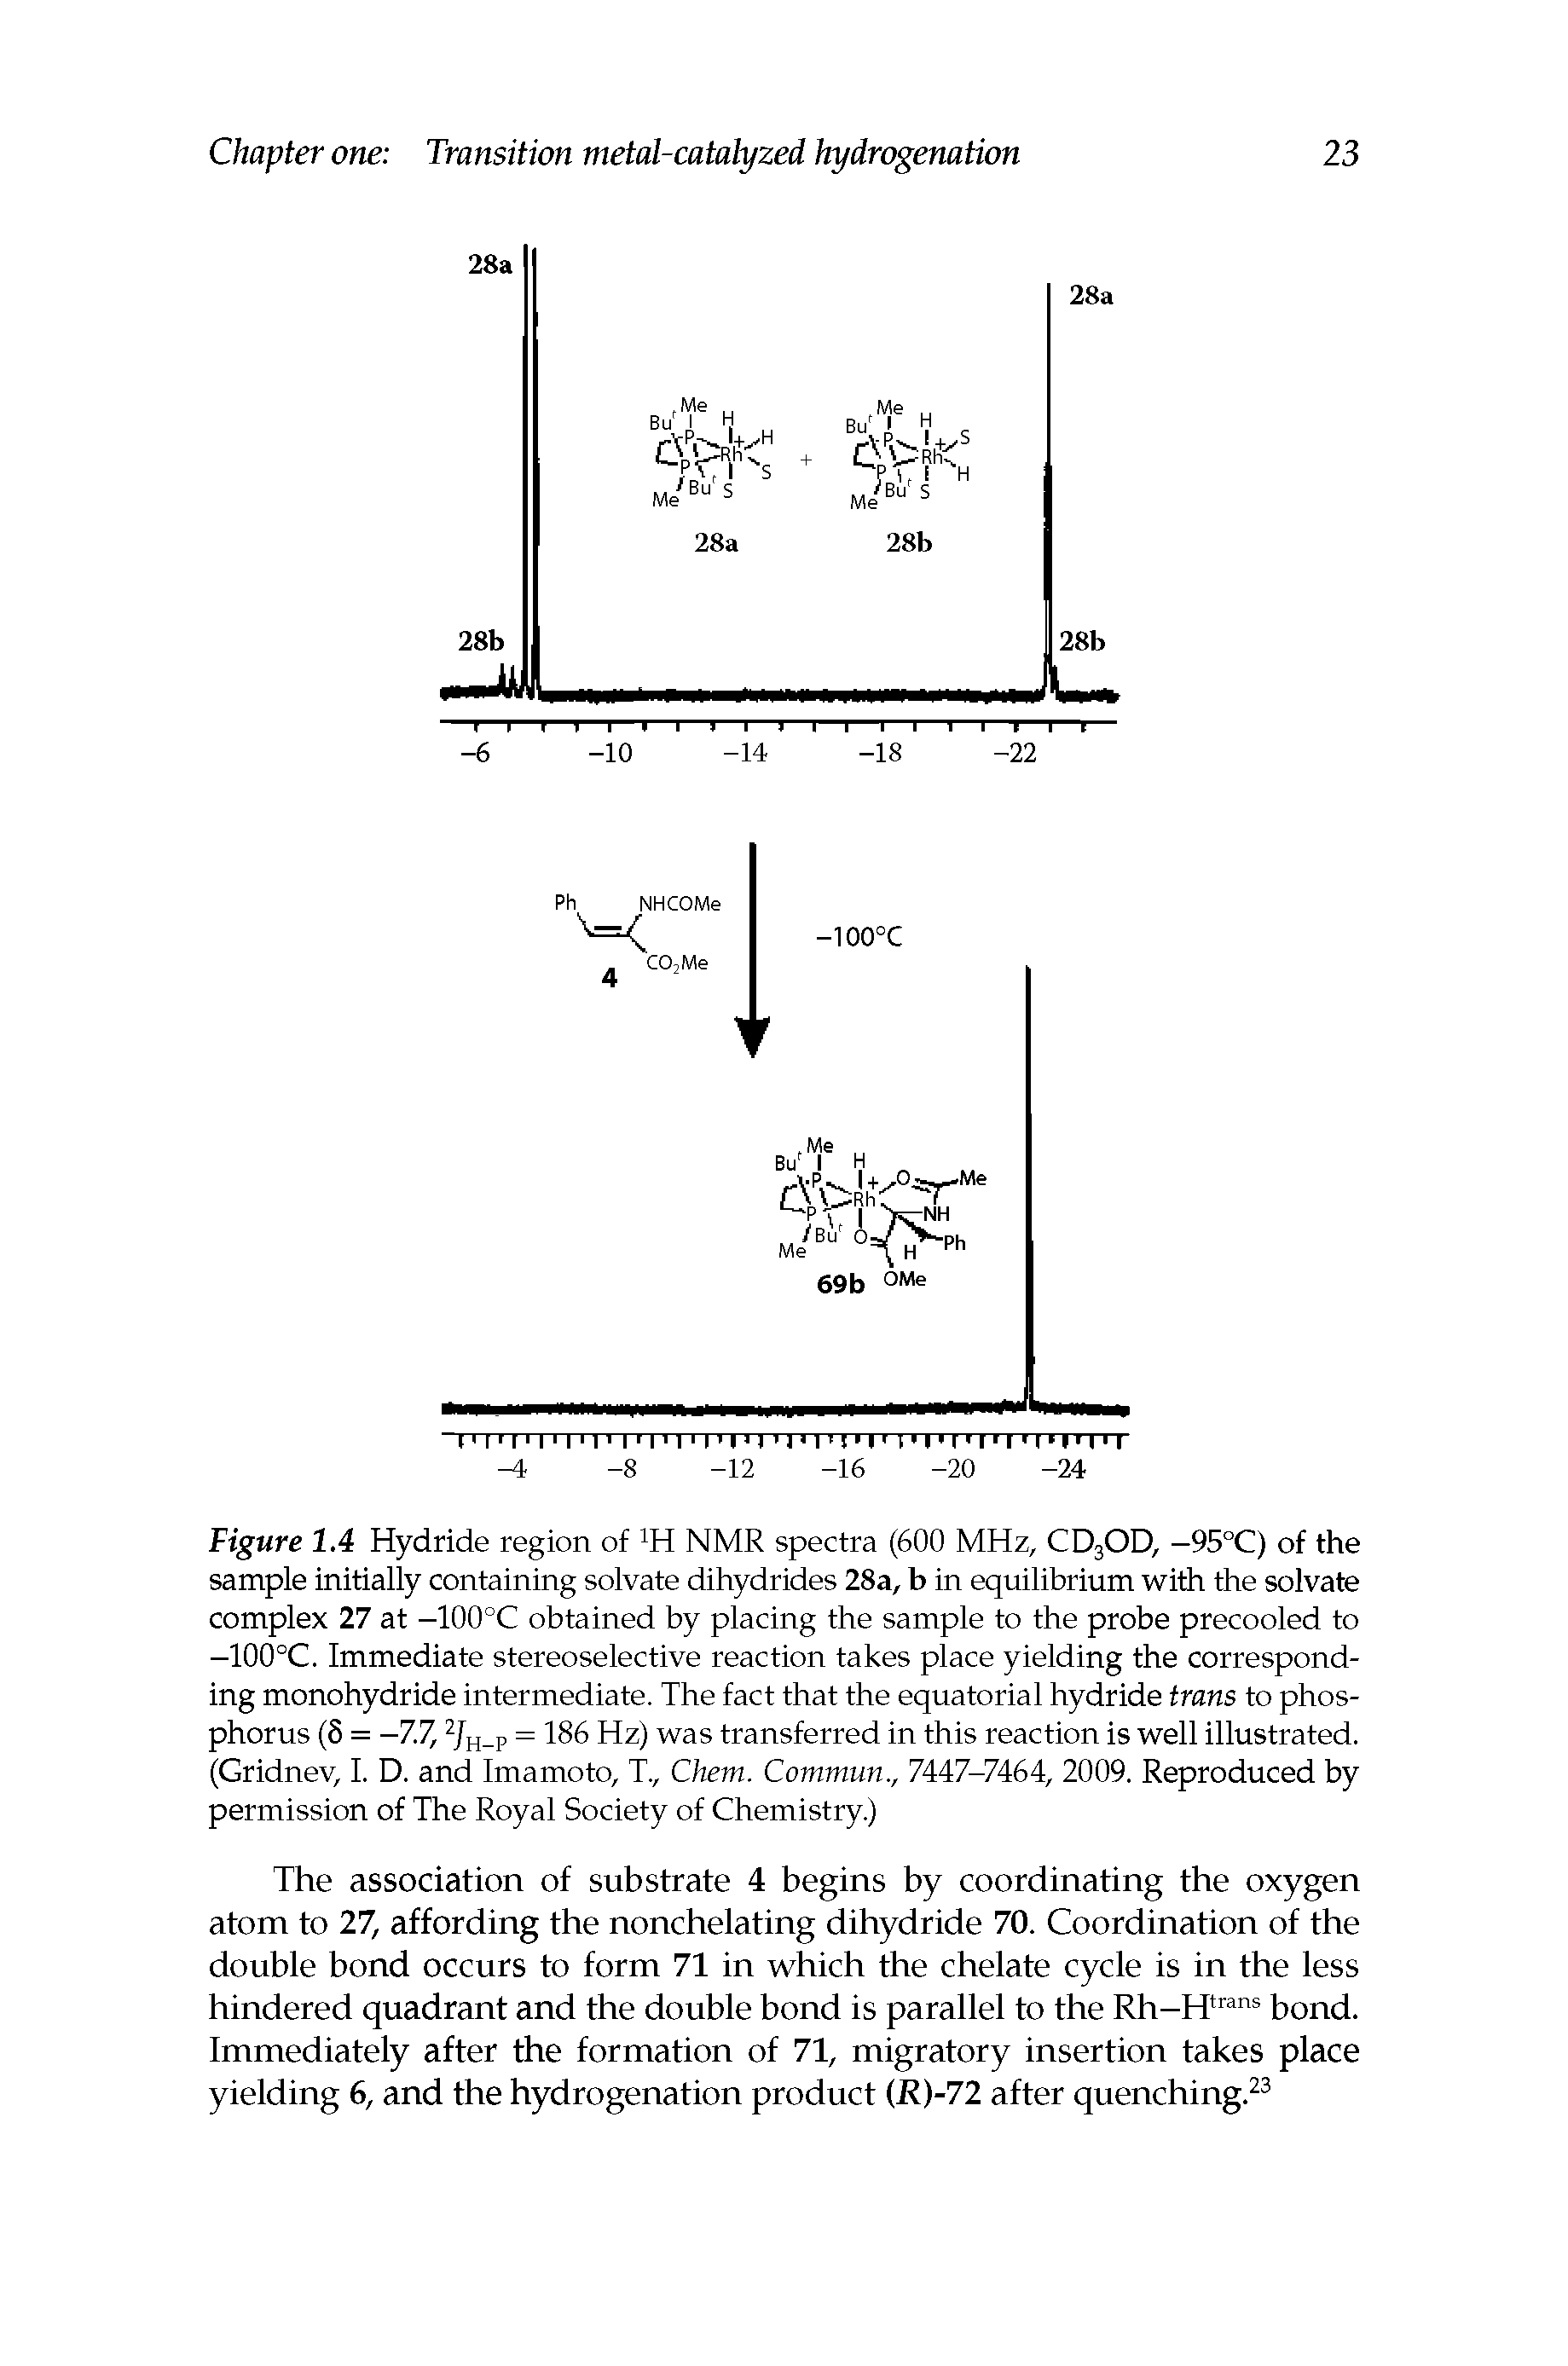 Figure 1.4 Hydride region of NMR spectra (600 MHz, CD3OD, —95°C) of the sample initially containing solvate dihydrides 28a, b in equilibrium with the solvate complex 27 at -100°C obtained by placing the sample to the probe precooled to -100°C. Immediate stereoselective reaction takes place yielding the corresponding monohydride intermediate. The fact that the equatorial hydride trans to phosphorus (5 = -7.7, = 186 Hz) was transferred in this reaction is well illustrated.